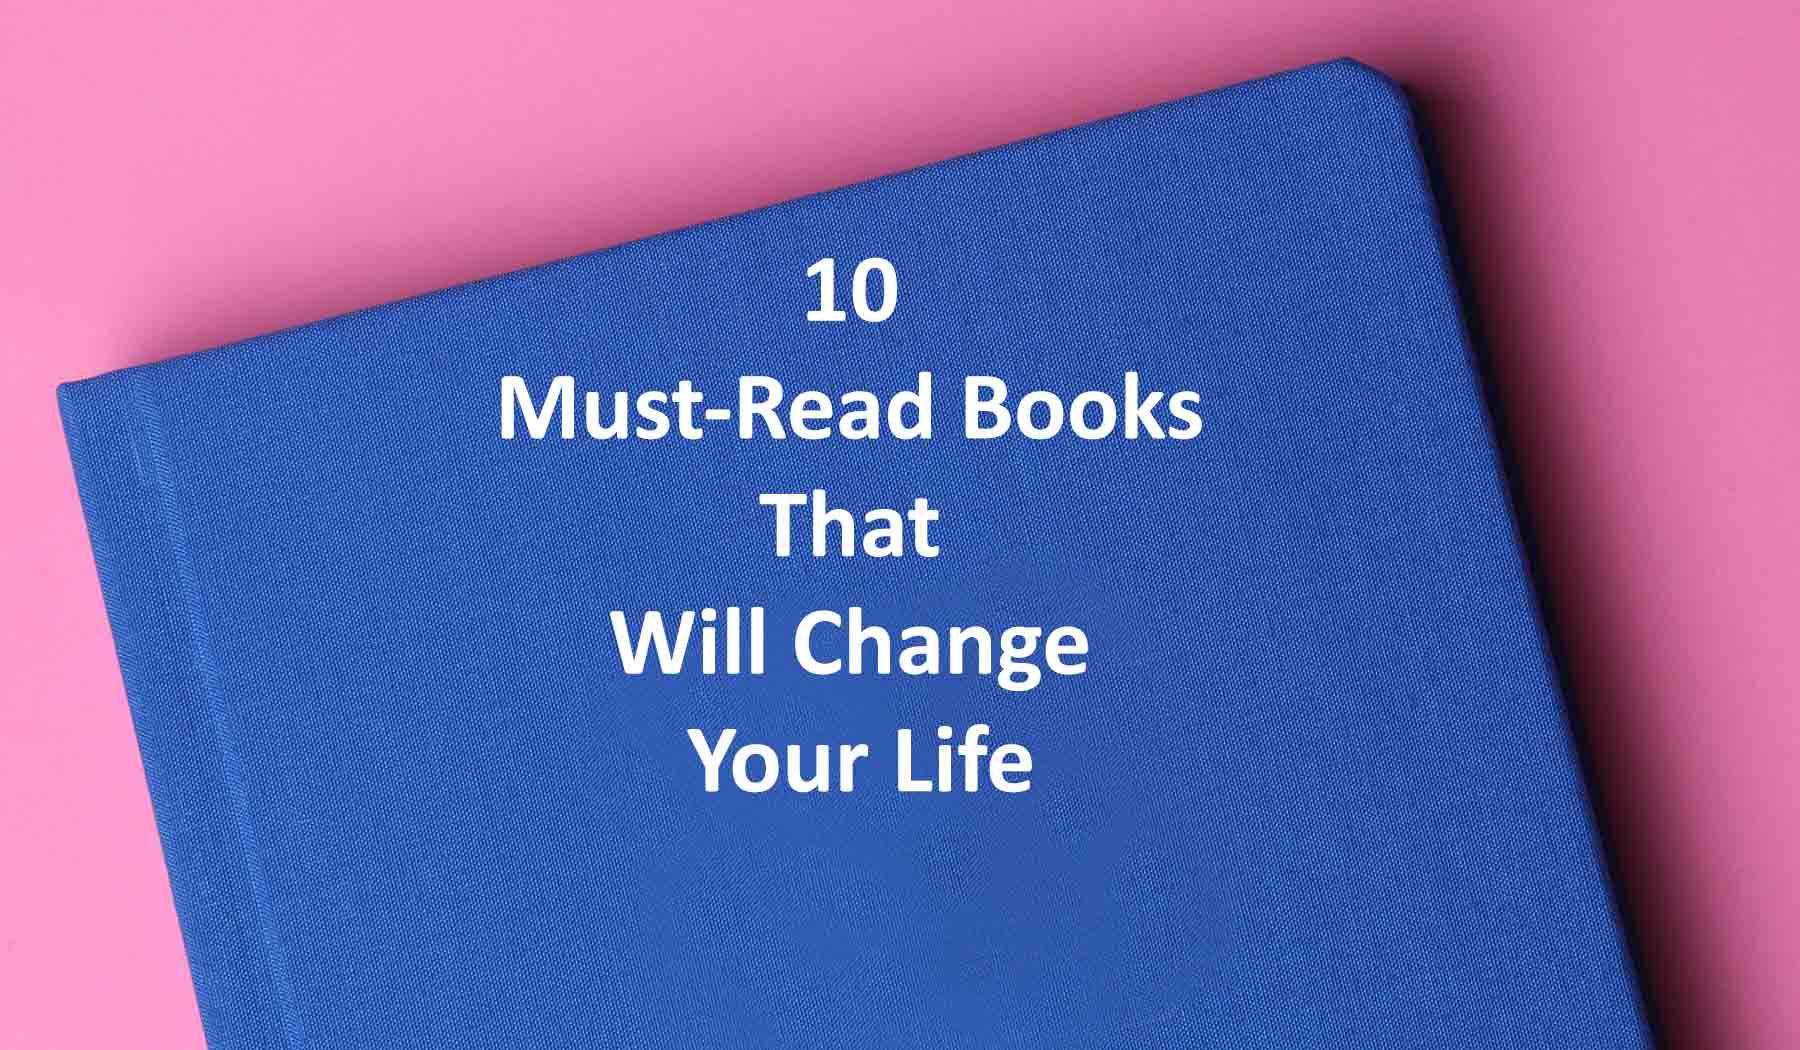 10 Must-Read Books That Will Change Your Life